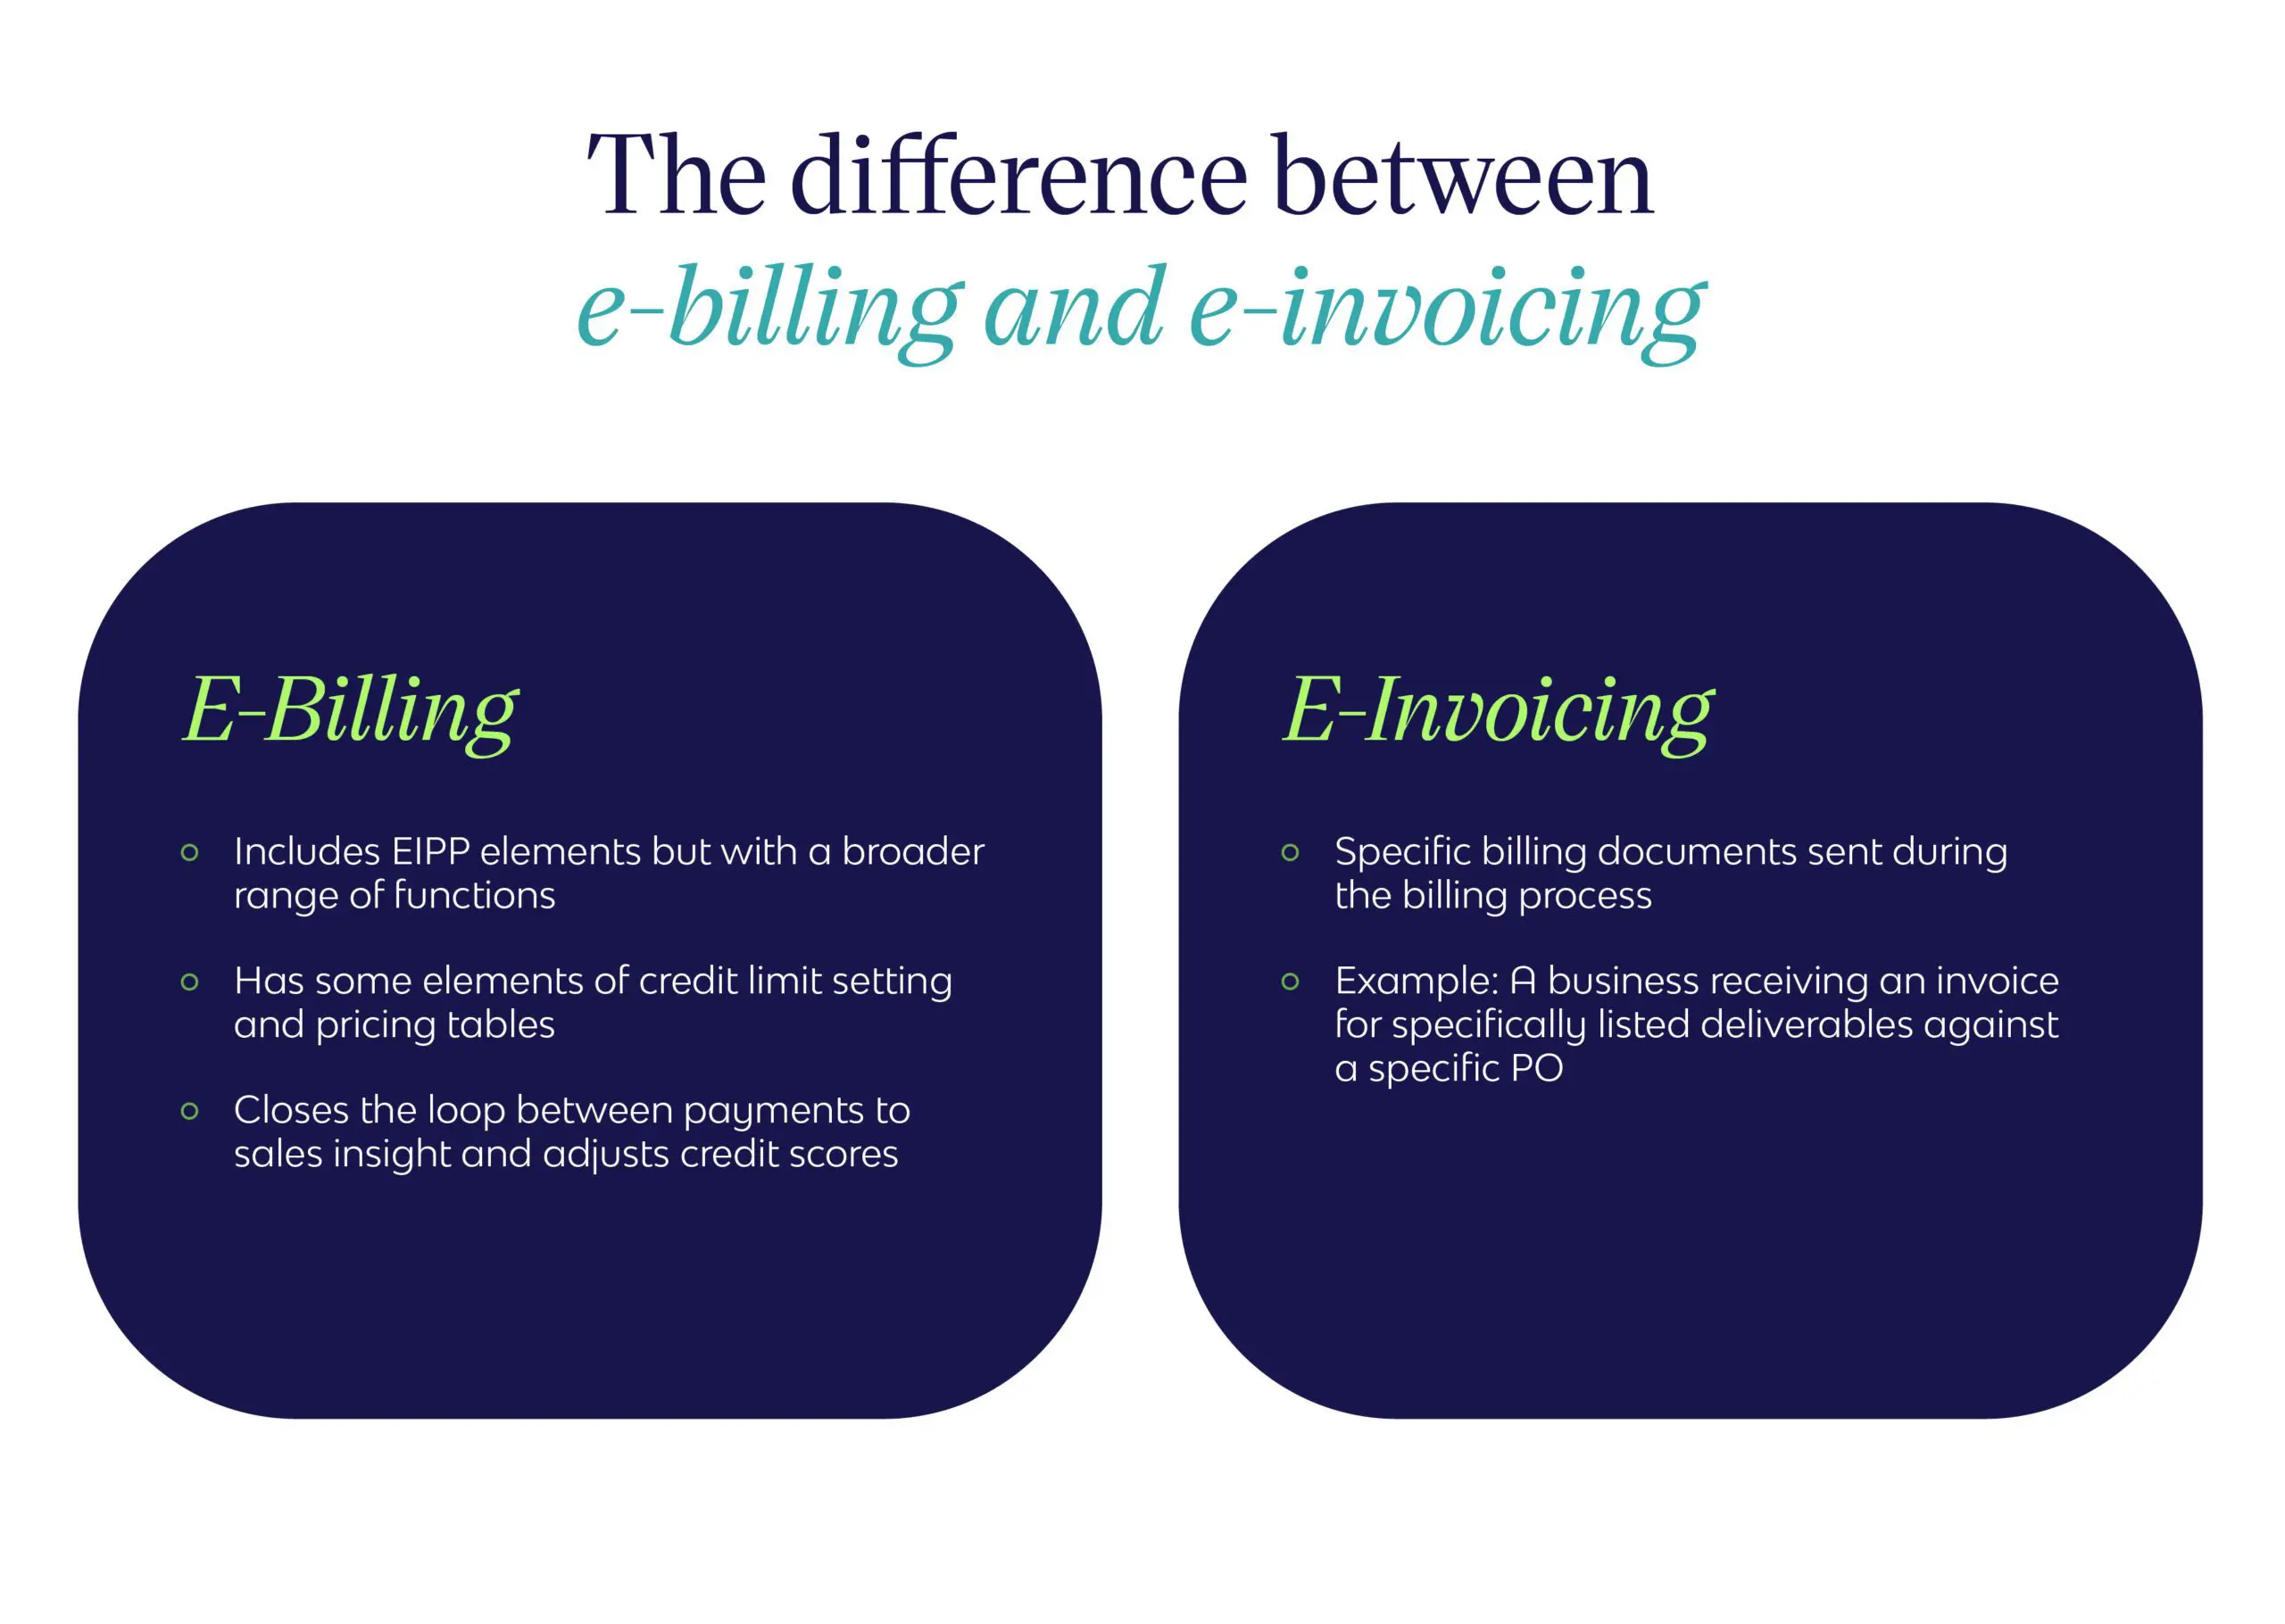 The key differences between e-billing and e-invoicing.